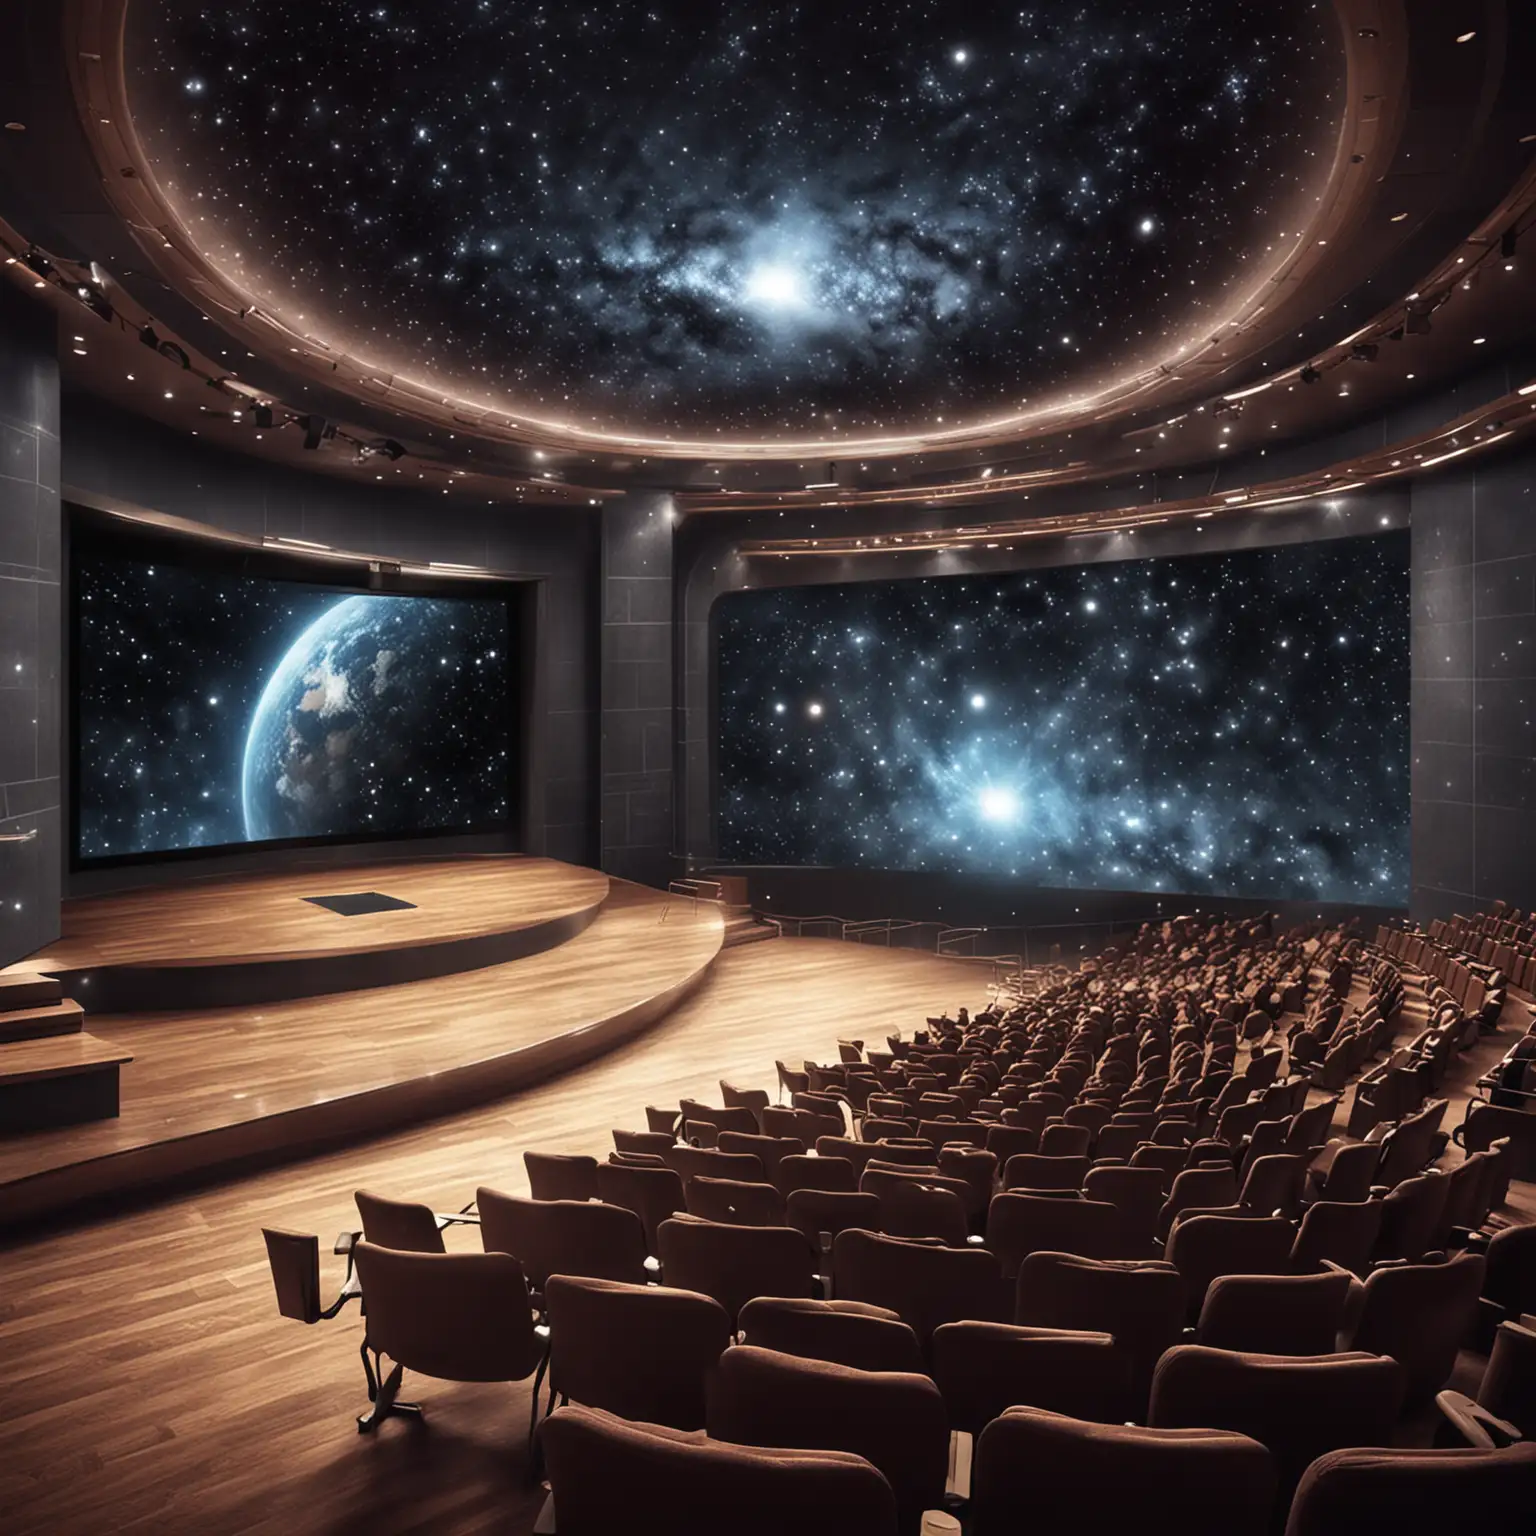 create an image that depicts an auditorium and learning environment with outer space effects